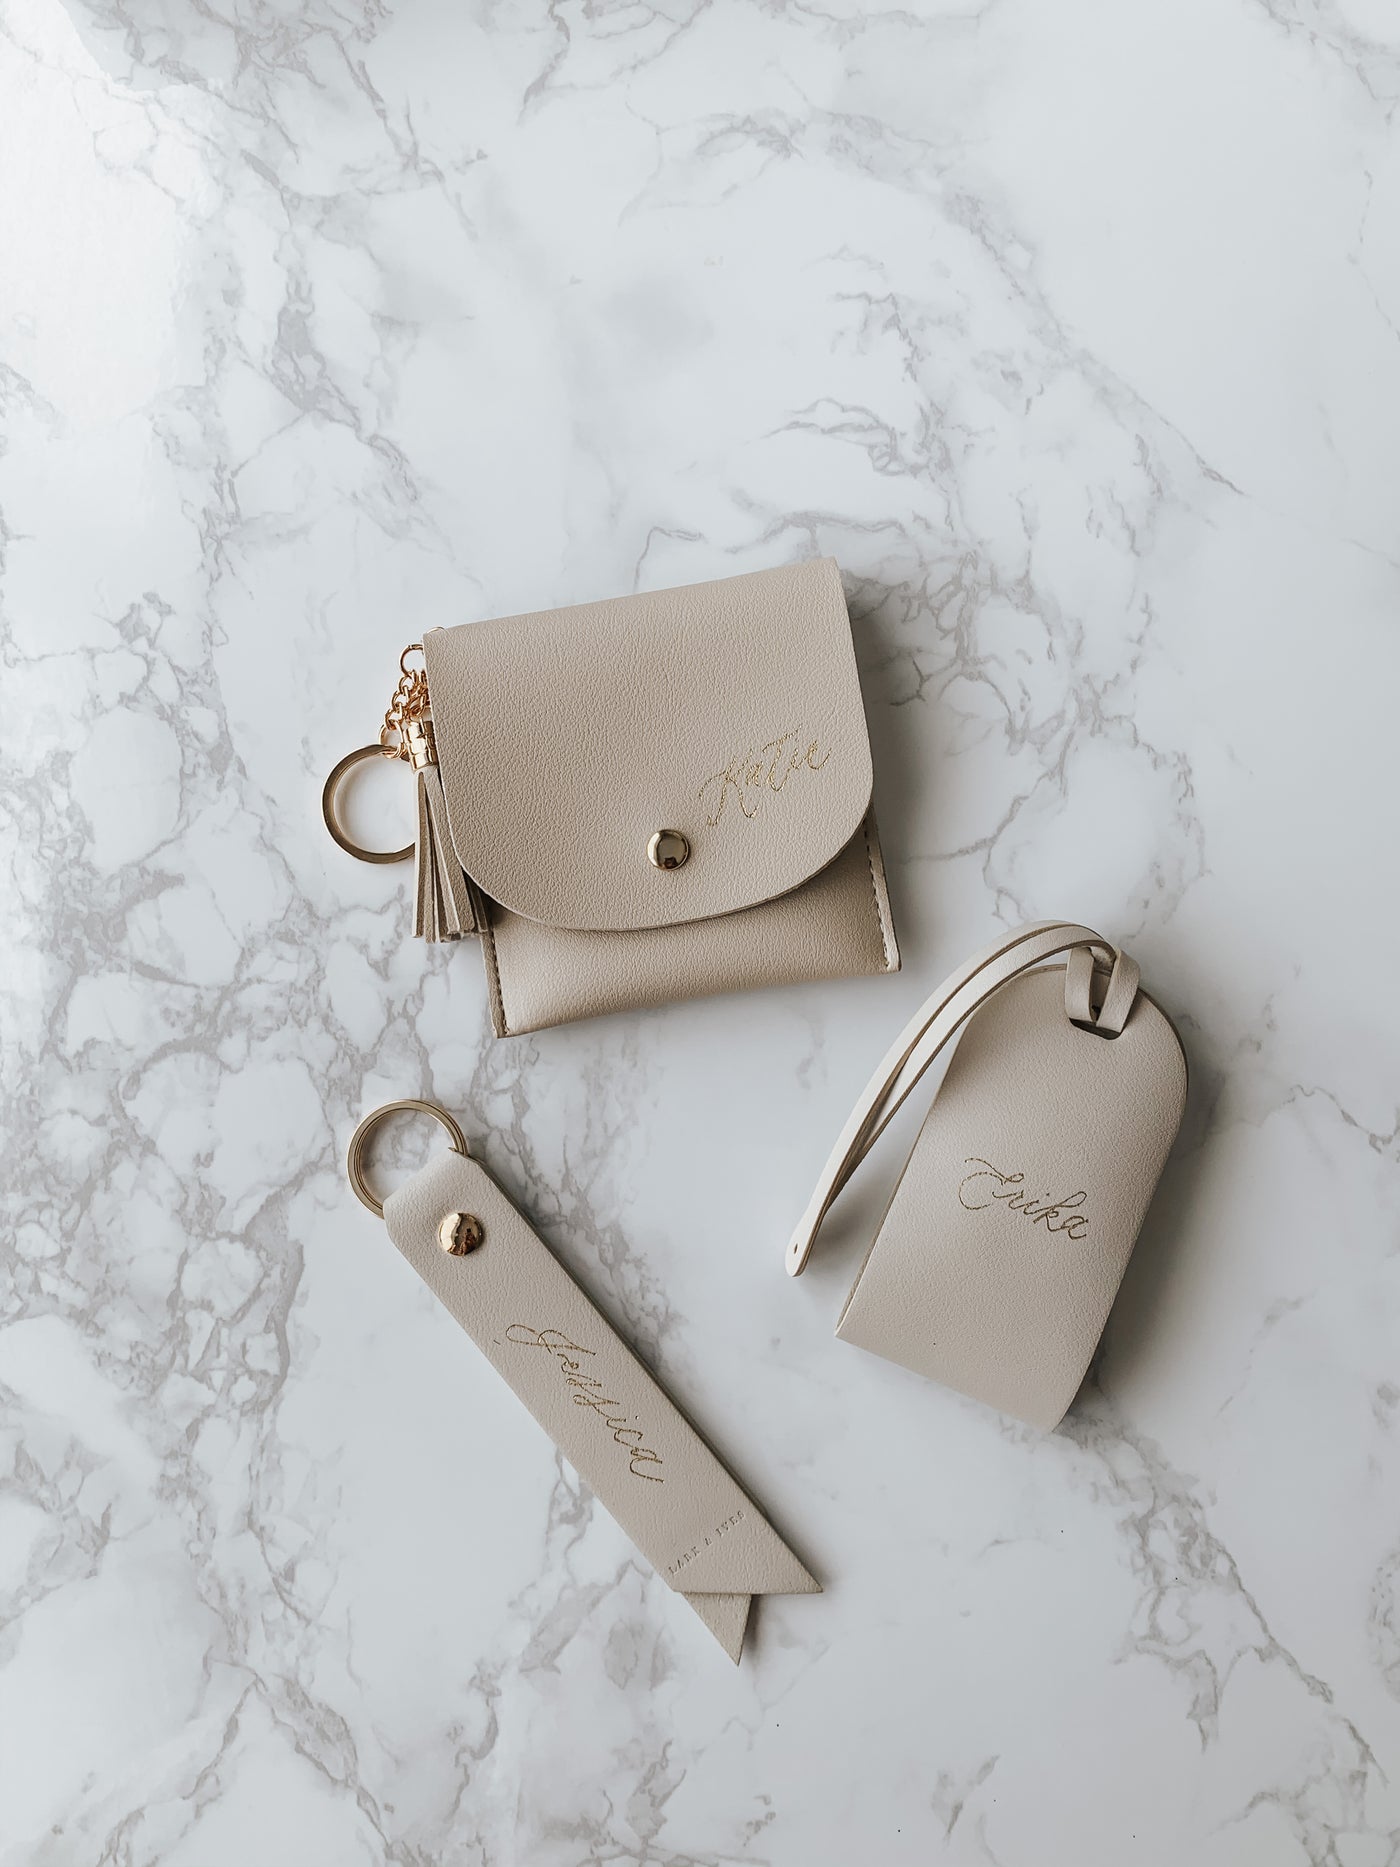 Lark and Ives / Vegan Leather Accessories / Keychain / Keyring / Strap Keychain / Minimal Accessories / Nude Pink / Neutral Colours / Personalized Keyholder along with Card Purse and Luggage Tag